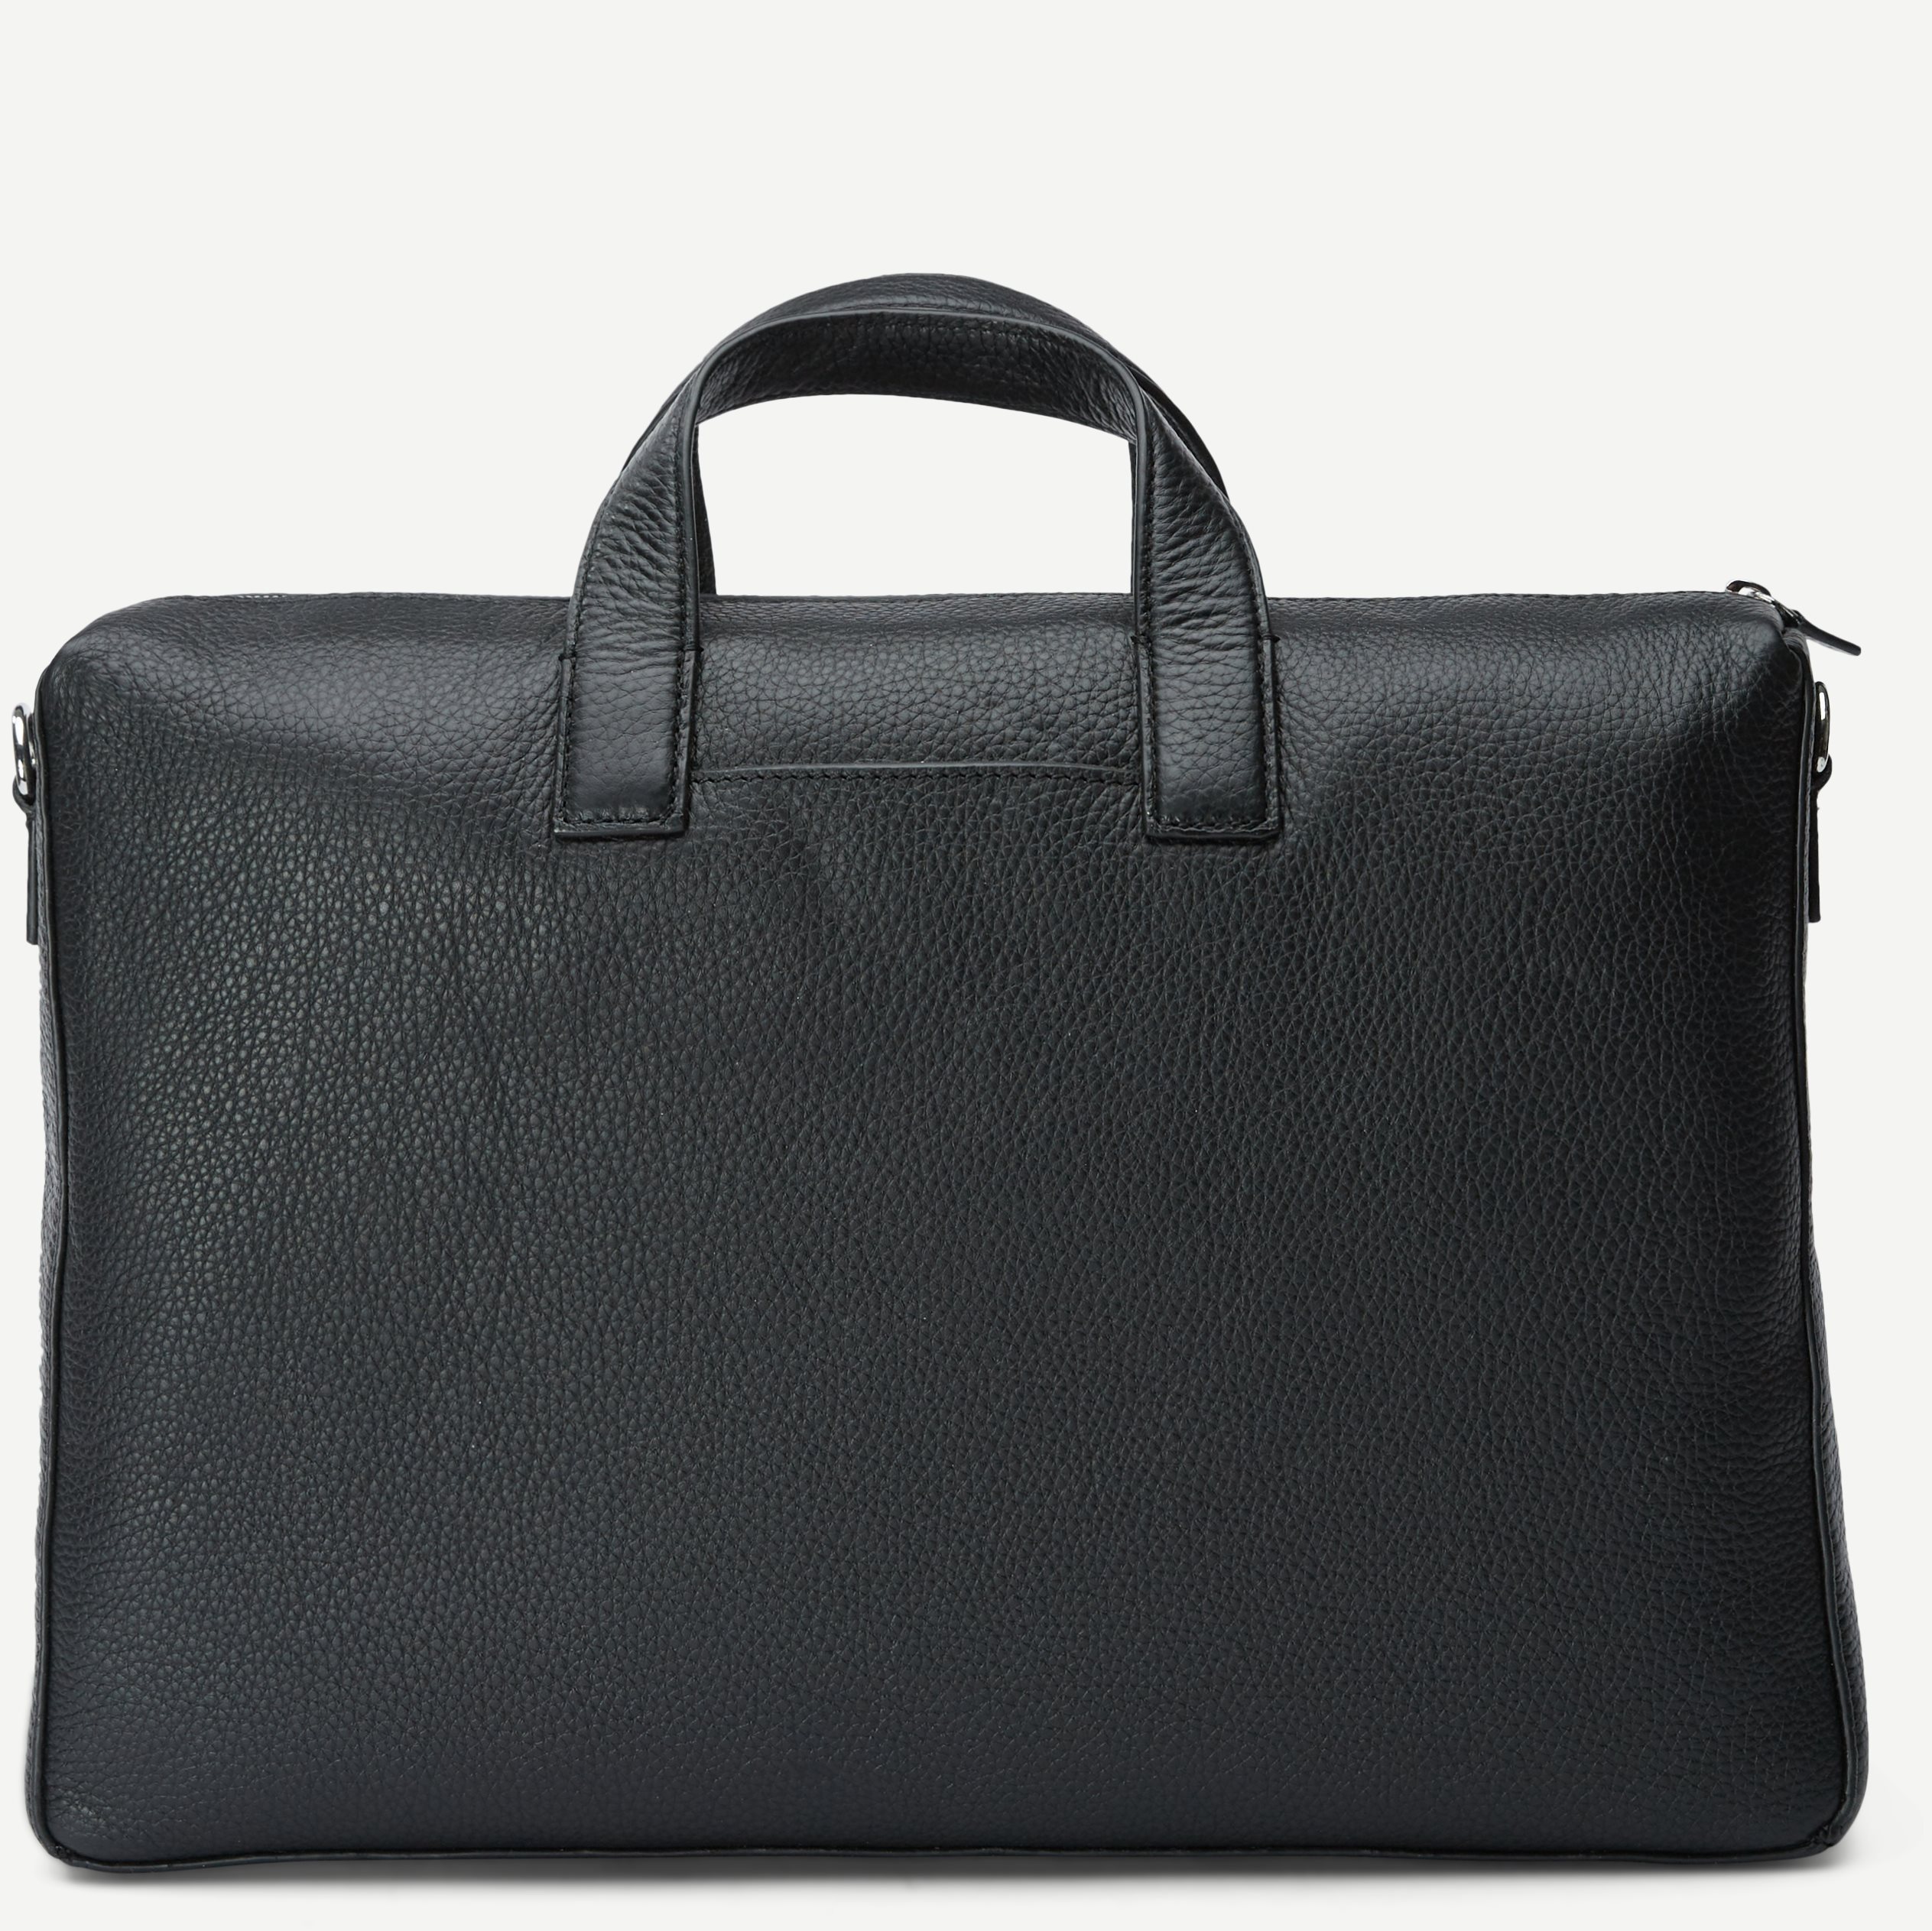 Bovern Briefcase - Bags - Black